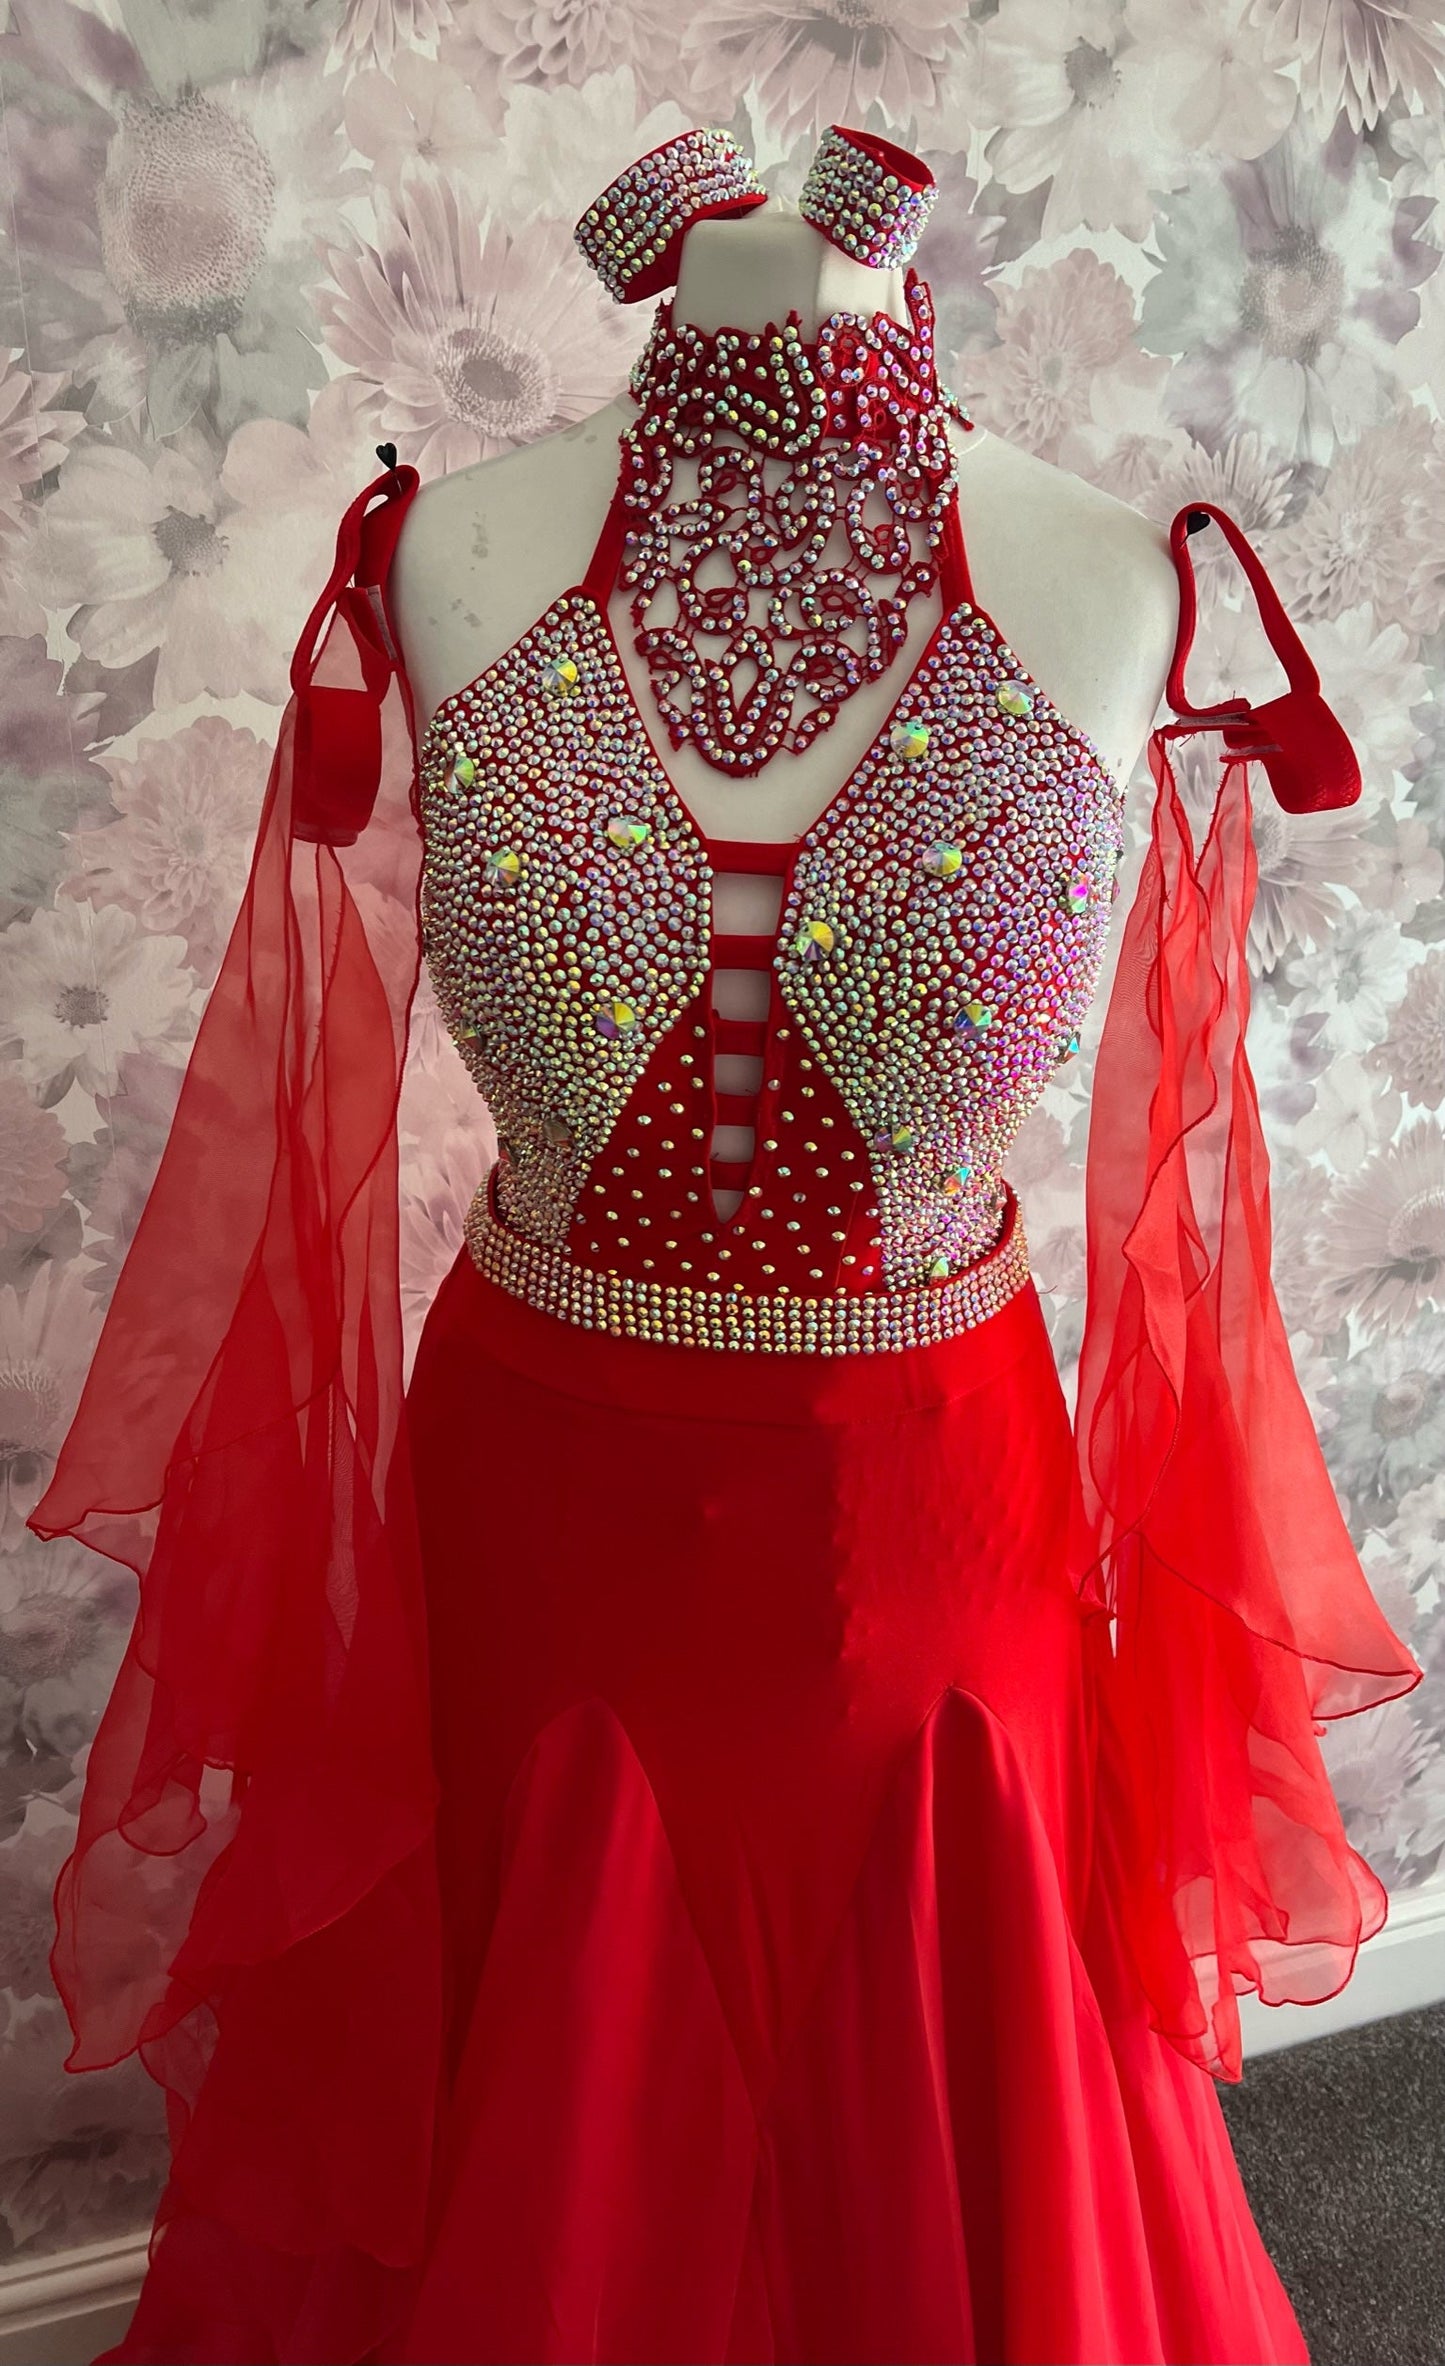 025 Red Latin Dress with Red Motif & AB stones. Ballroom Skirt with x4 arm floats and AB stoned belt